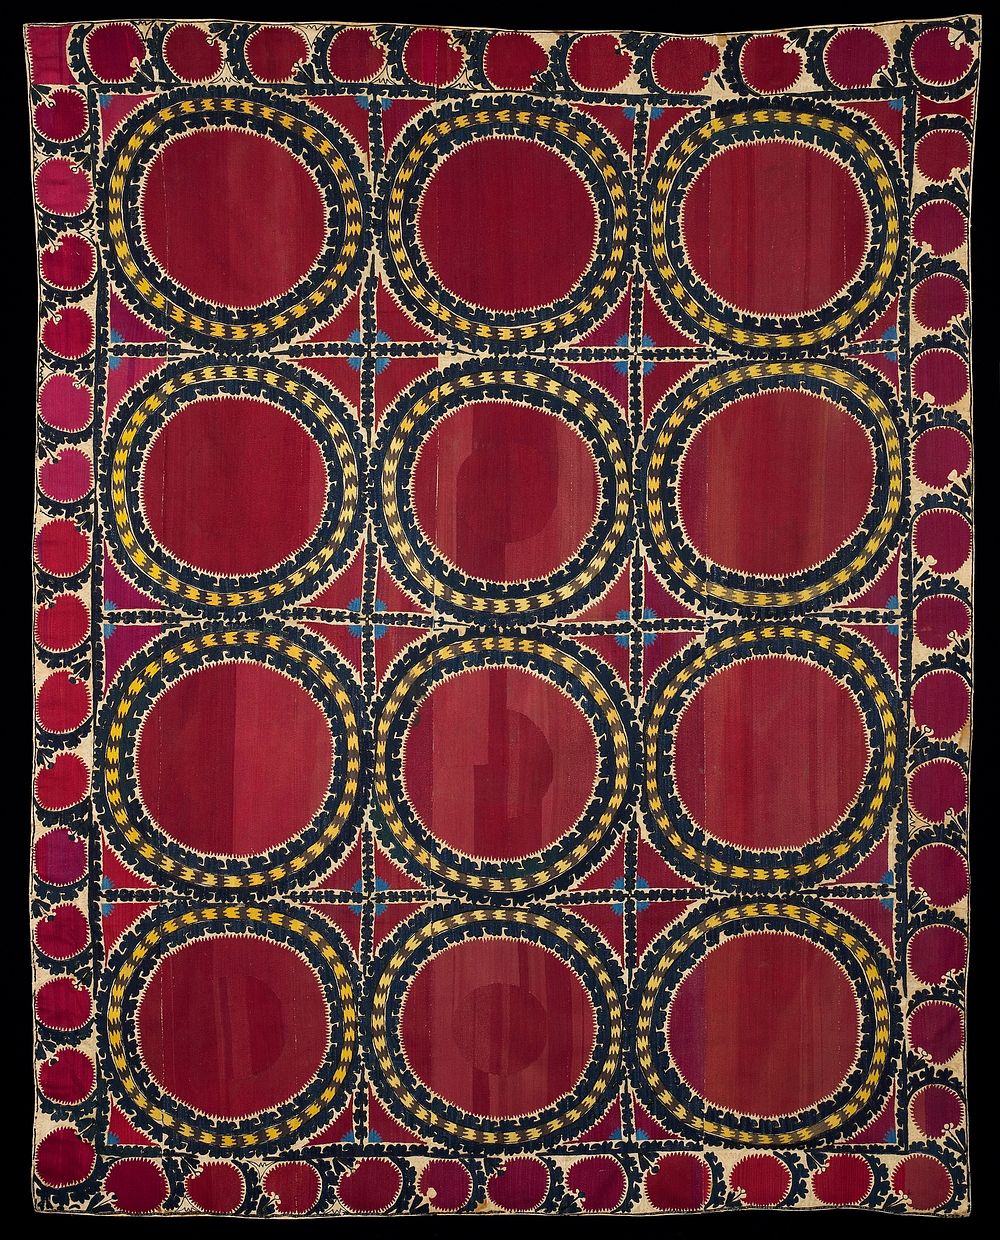 Newly lined. Silk embroidery on coarse tan cotton ground. Red dominates. Twelve large circles with 4: borders around…